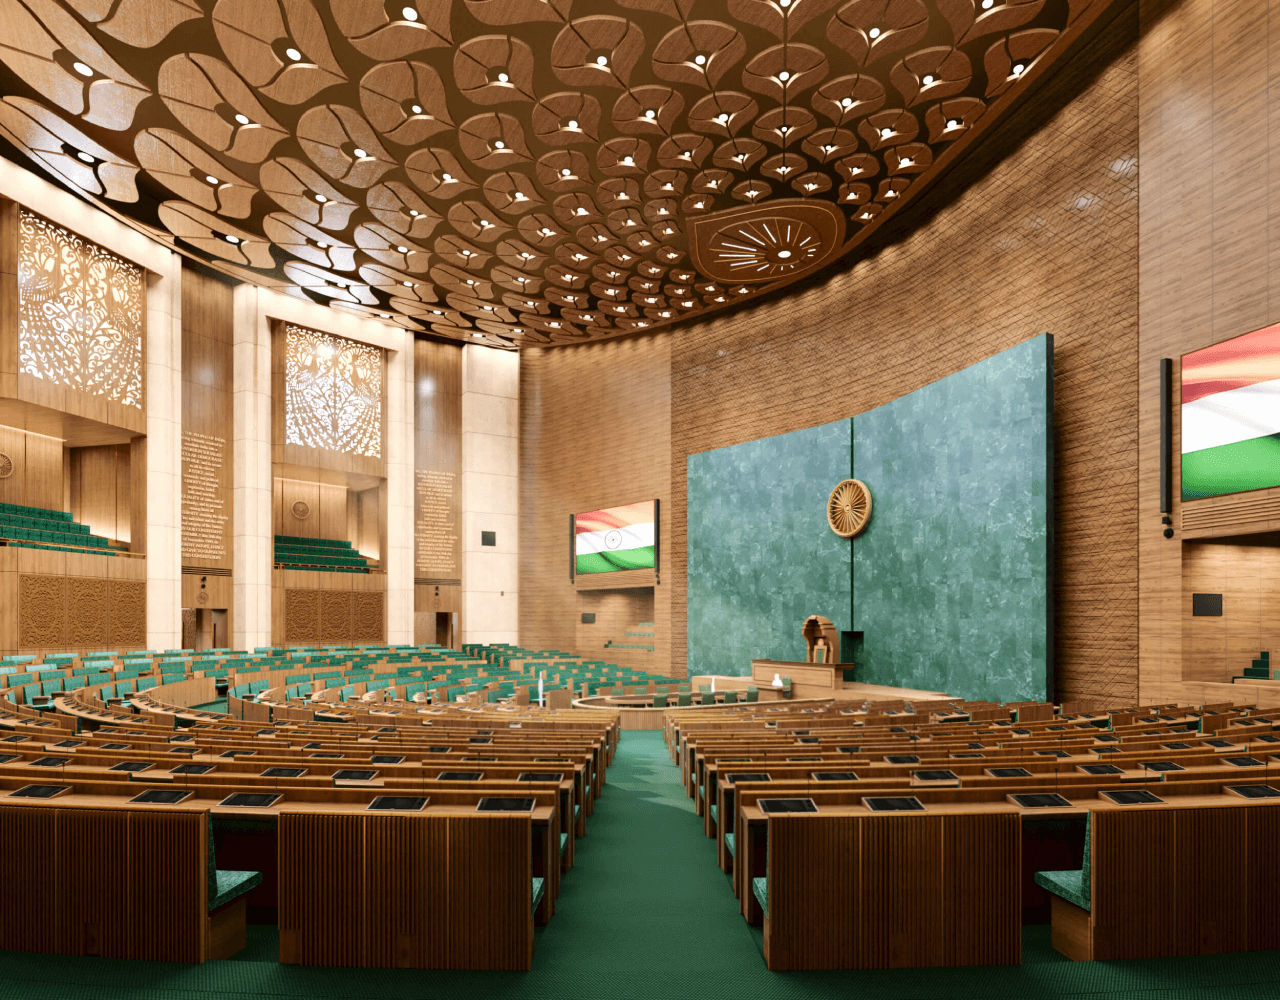 New Parliament building: All you need to know